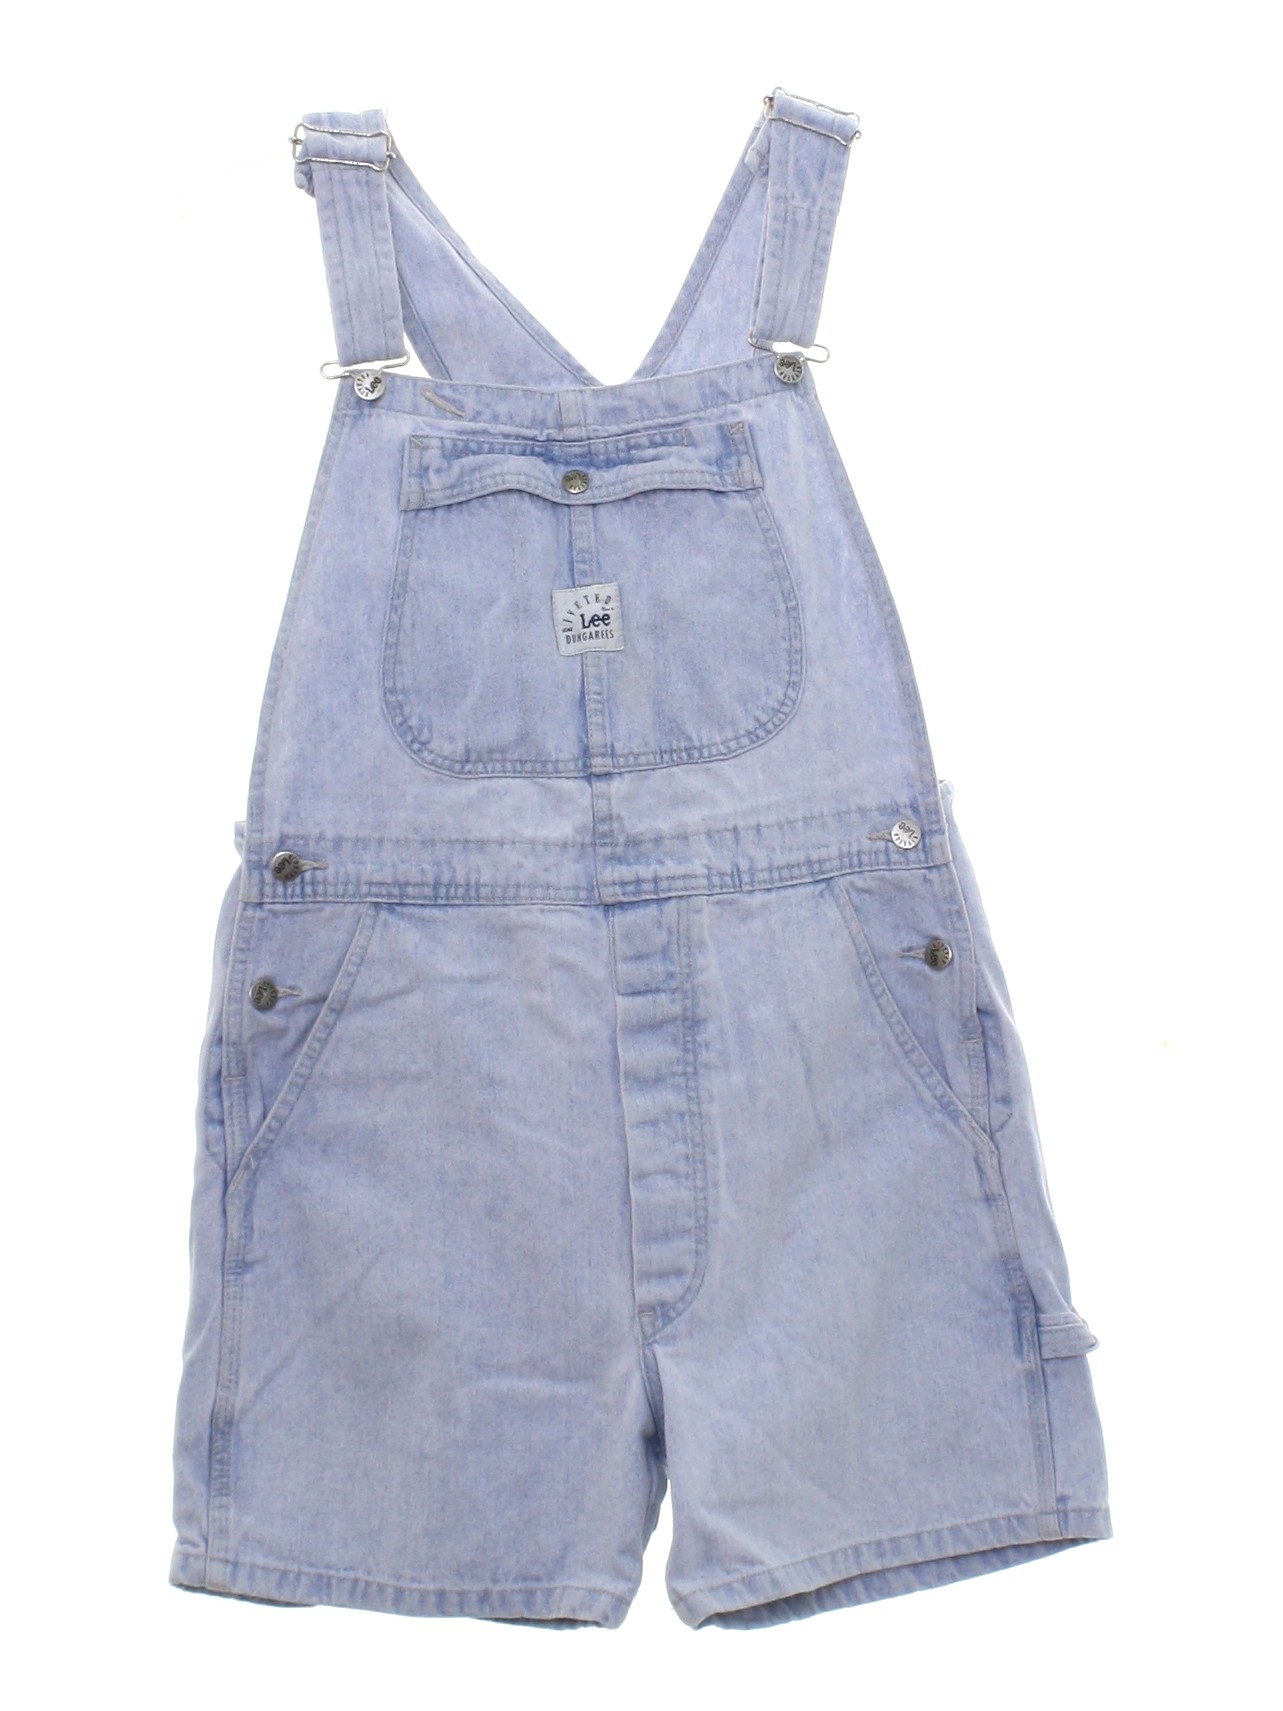 lee dungarees womens